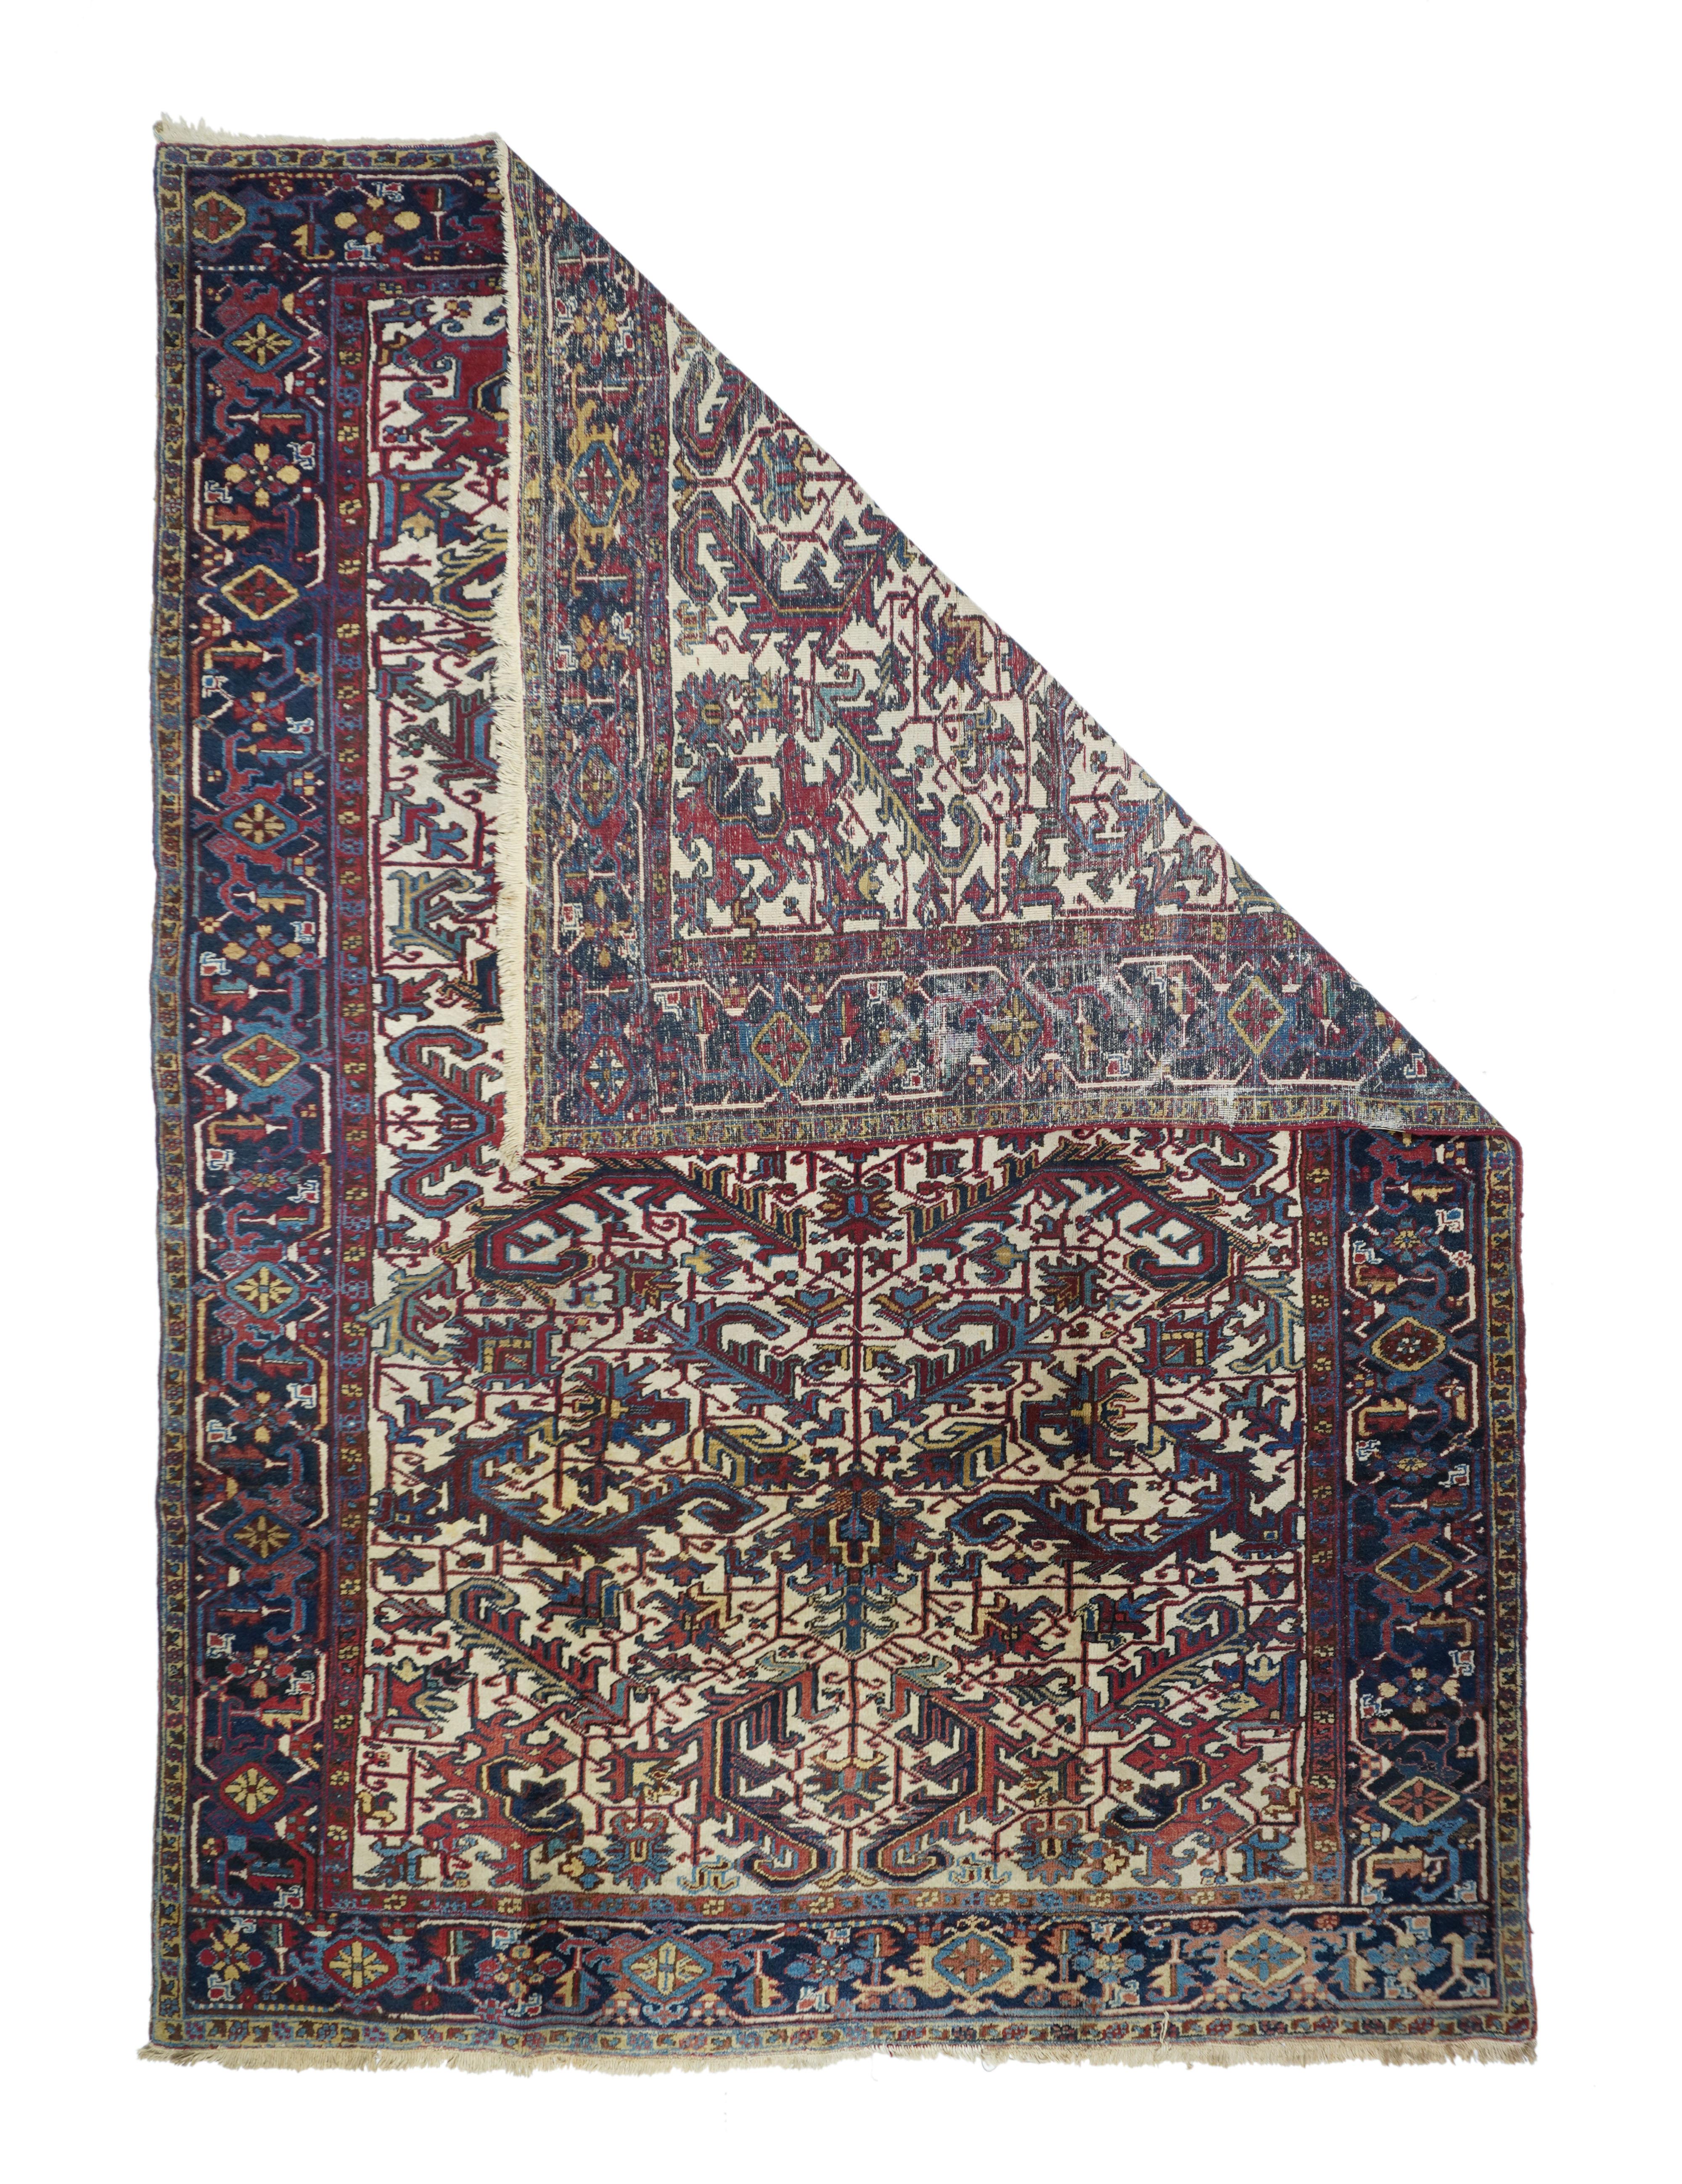 Vintage Heriz rug¬†7'4'' x 10'5''. The warm ecru ground shows a central axial pole, anchored by two petal palmettes, with pairs and singletons of large, volute, bent ragged bitonal leaves, right-angle vinery and supporting lesser palmettes. Navy